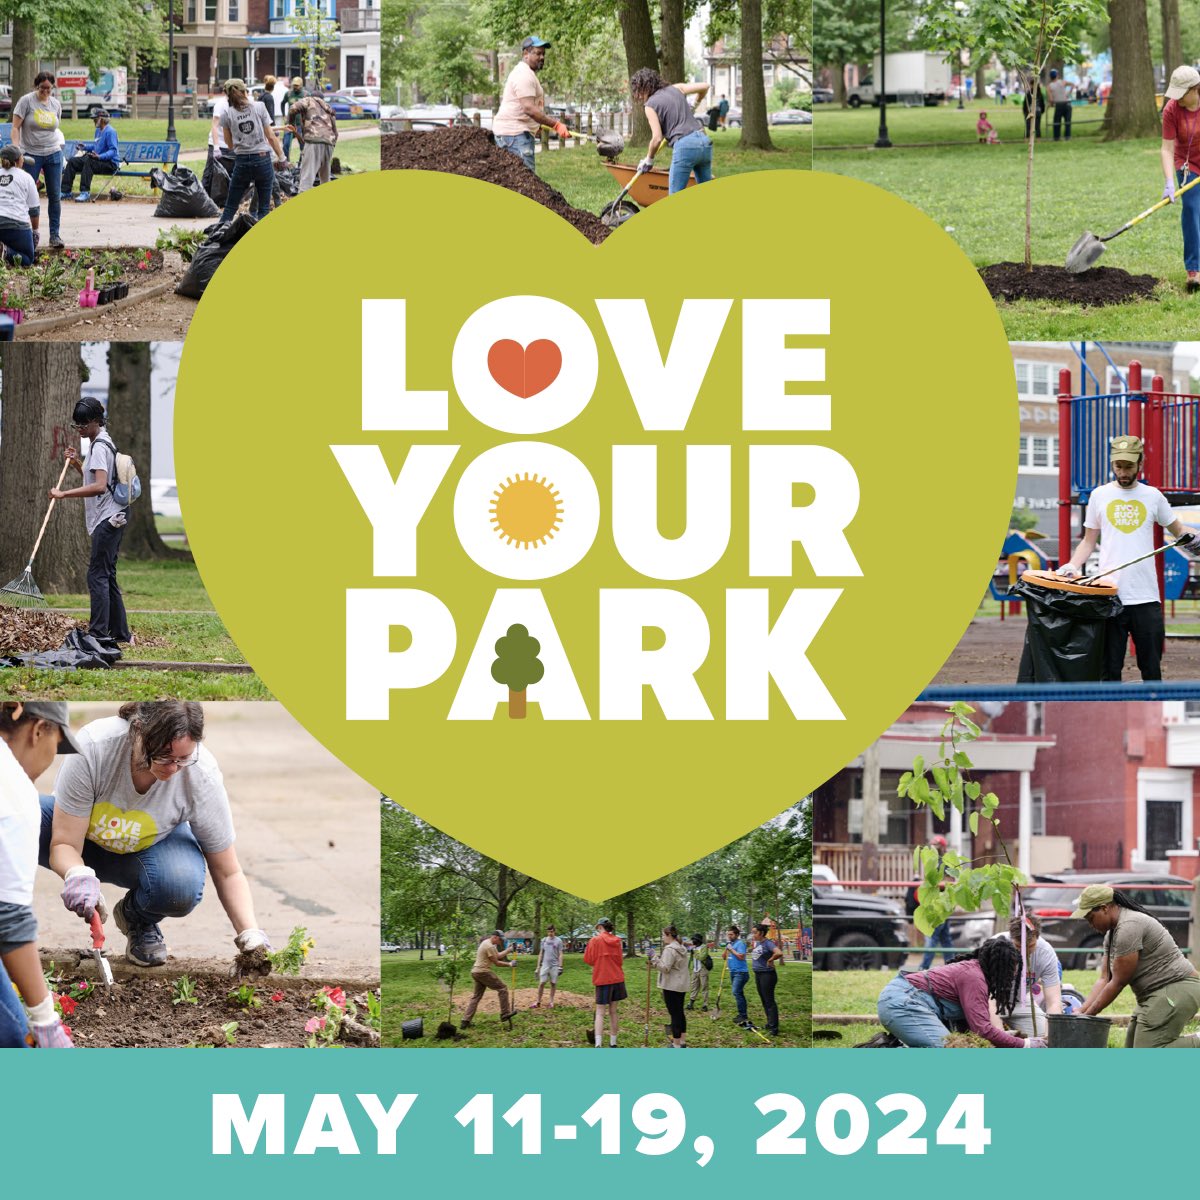 Registration is now open for Love Your Park Week with us,@philaparkandrec, and PFN groups across Philly! Volunteer at your local park from May 11-19 to help prepare for a busy summer season. Register for a clean-up: bit.ly/LYP-S24